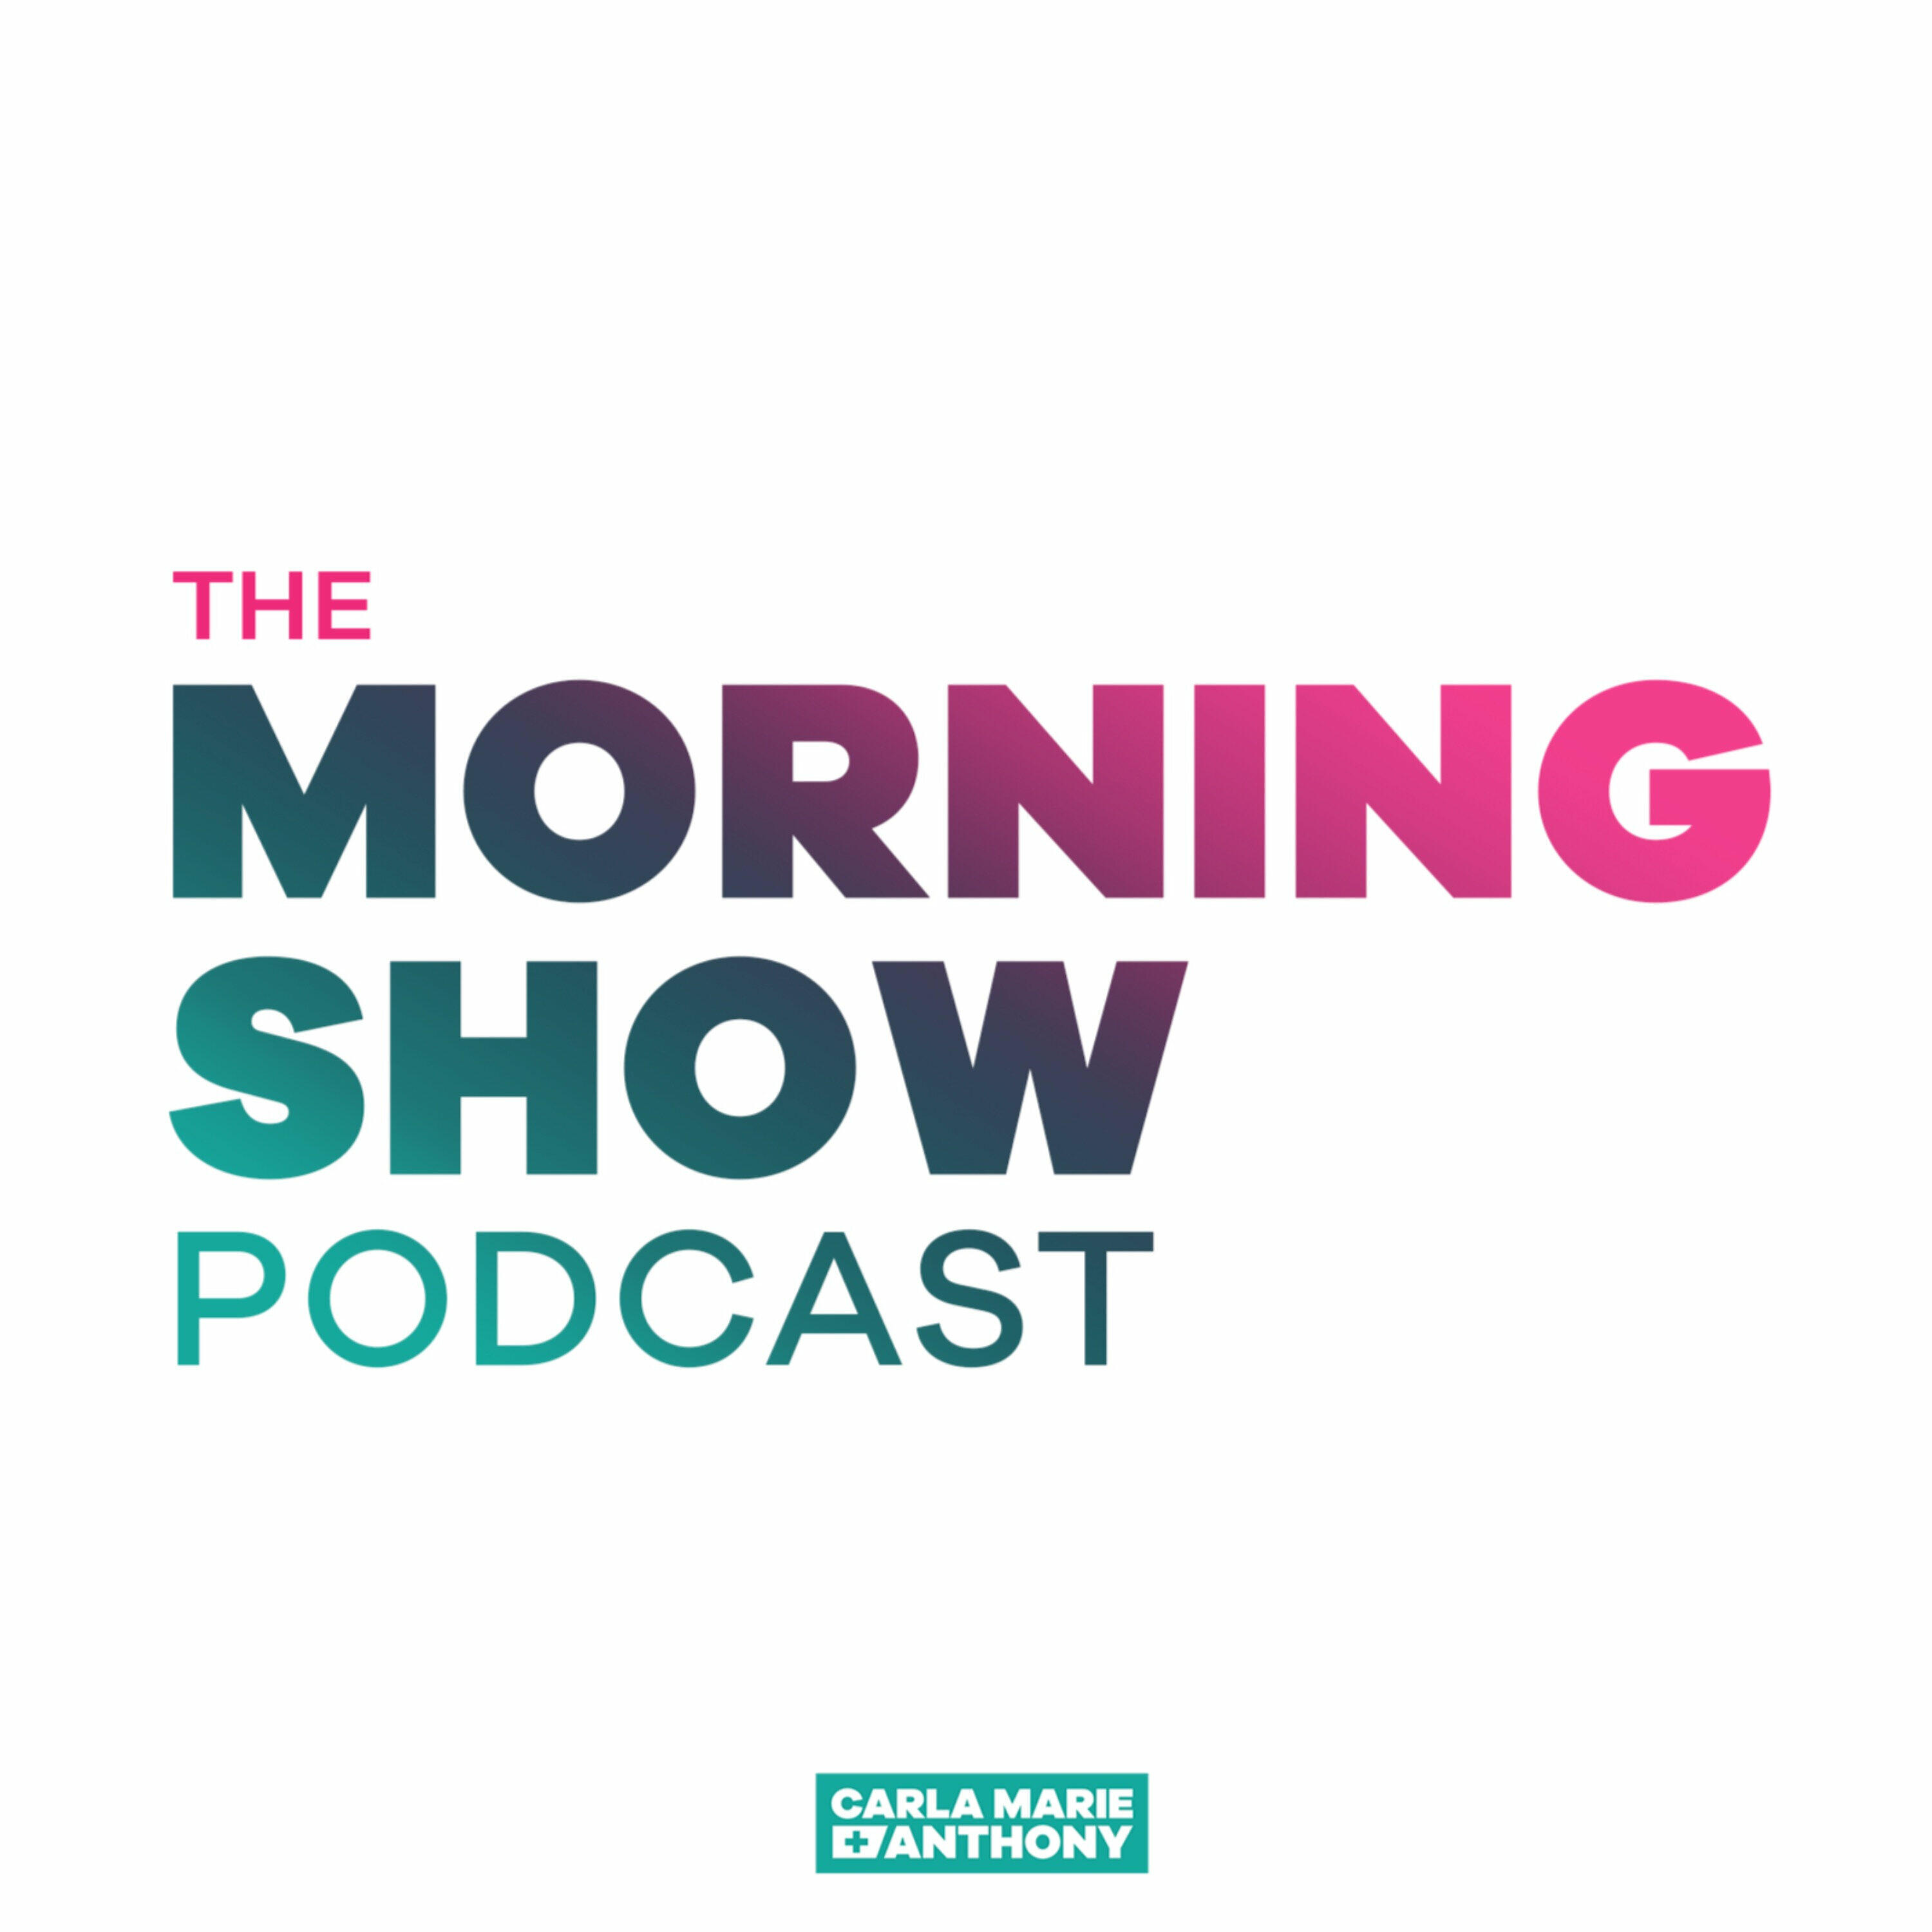 The Morning Show Podcast | iHeart